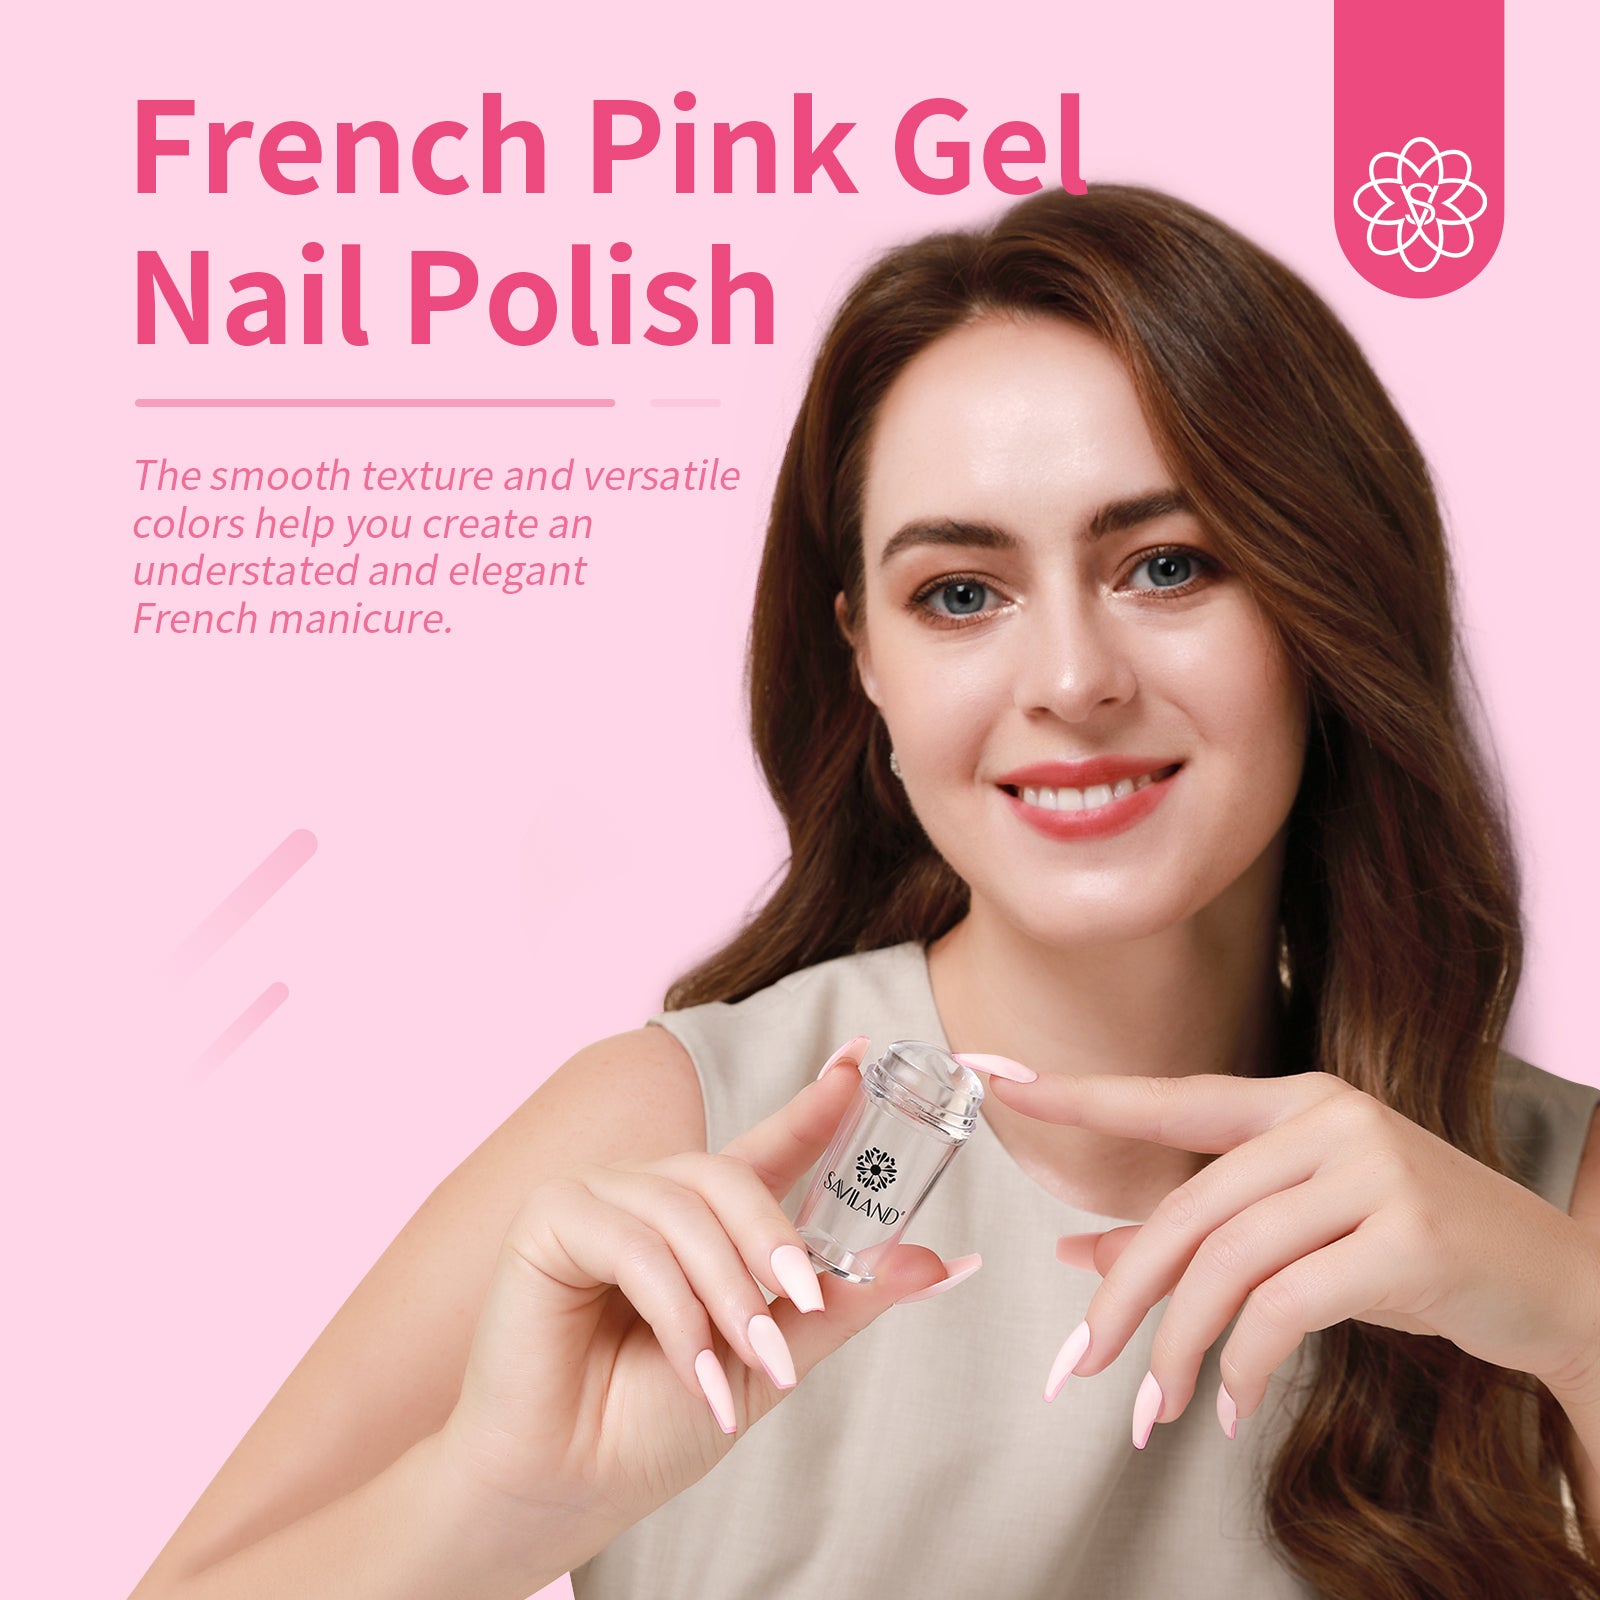 [US ONLY]French Manicure Kit - 4PCS Jelly Silicone Nail Stamper